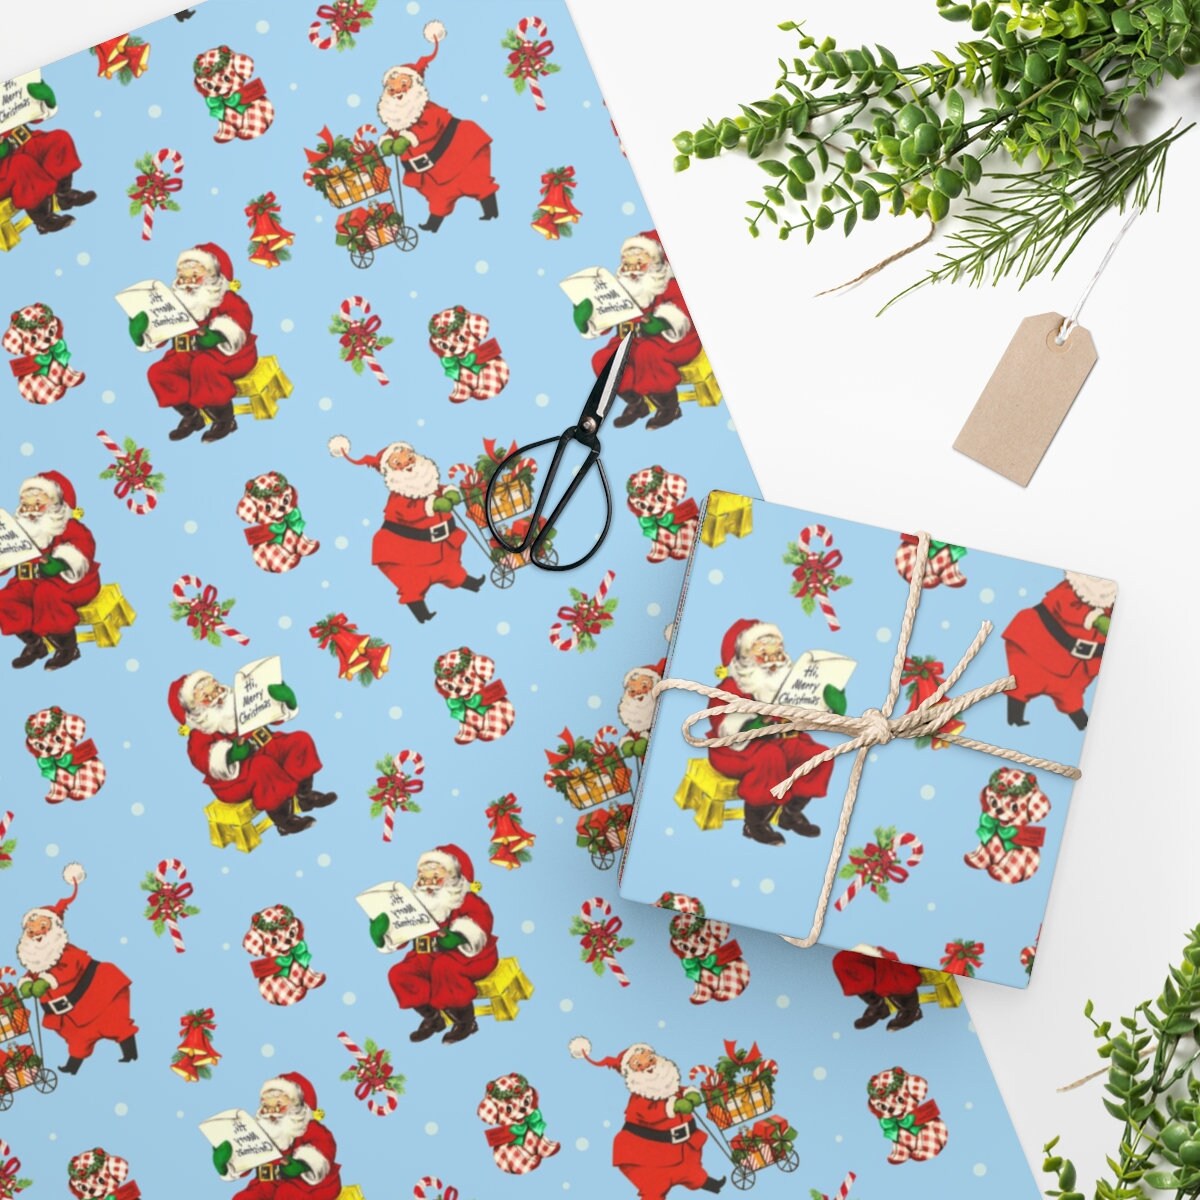 Vintage Wrapping Paper Christmas Puddin Full Sheet Gift Wrap